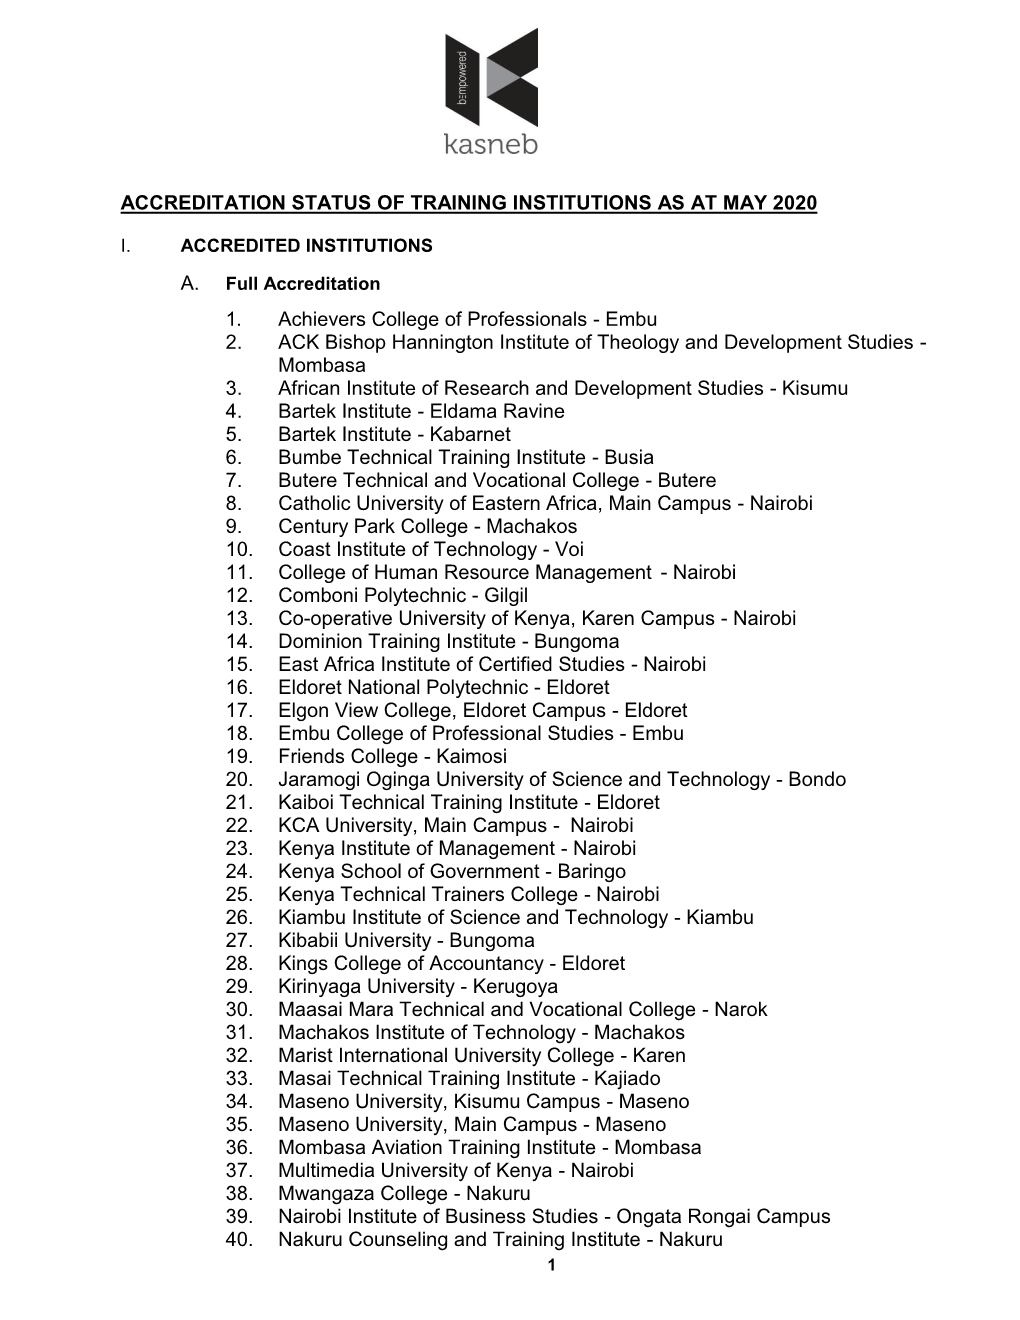 ACCREDITATION STATUS of TRAINING INSTITUTIONS AS at MAY 2020 1. Achievers College of Professionals